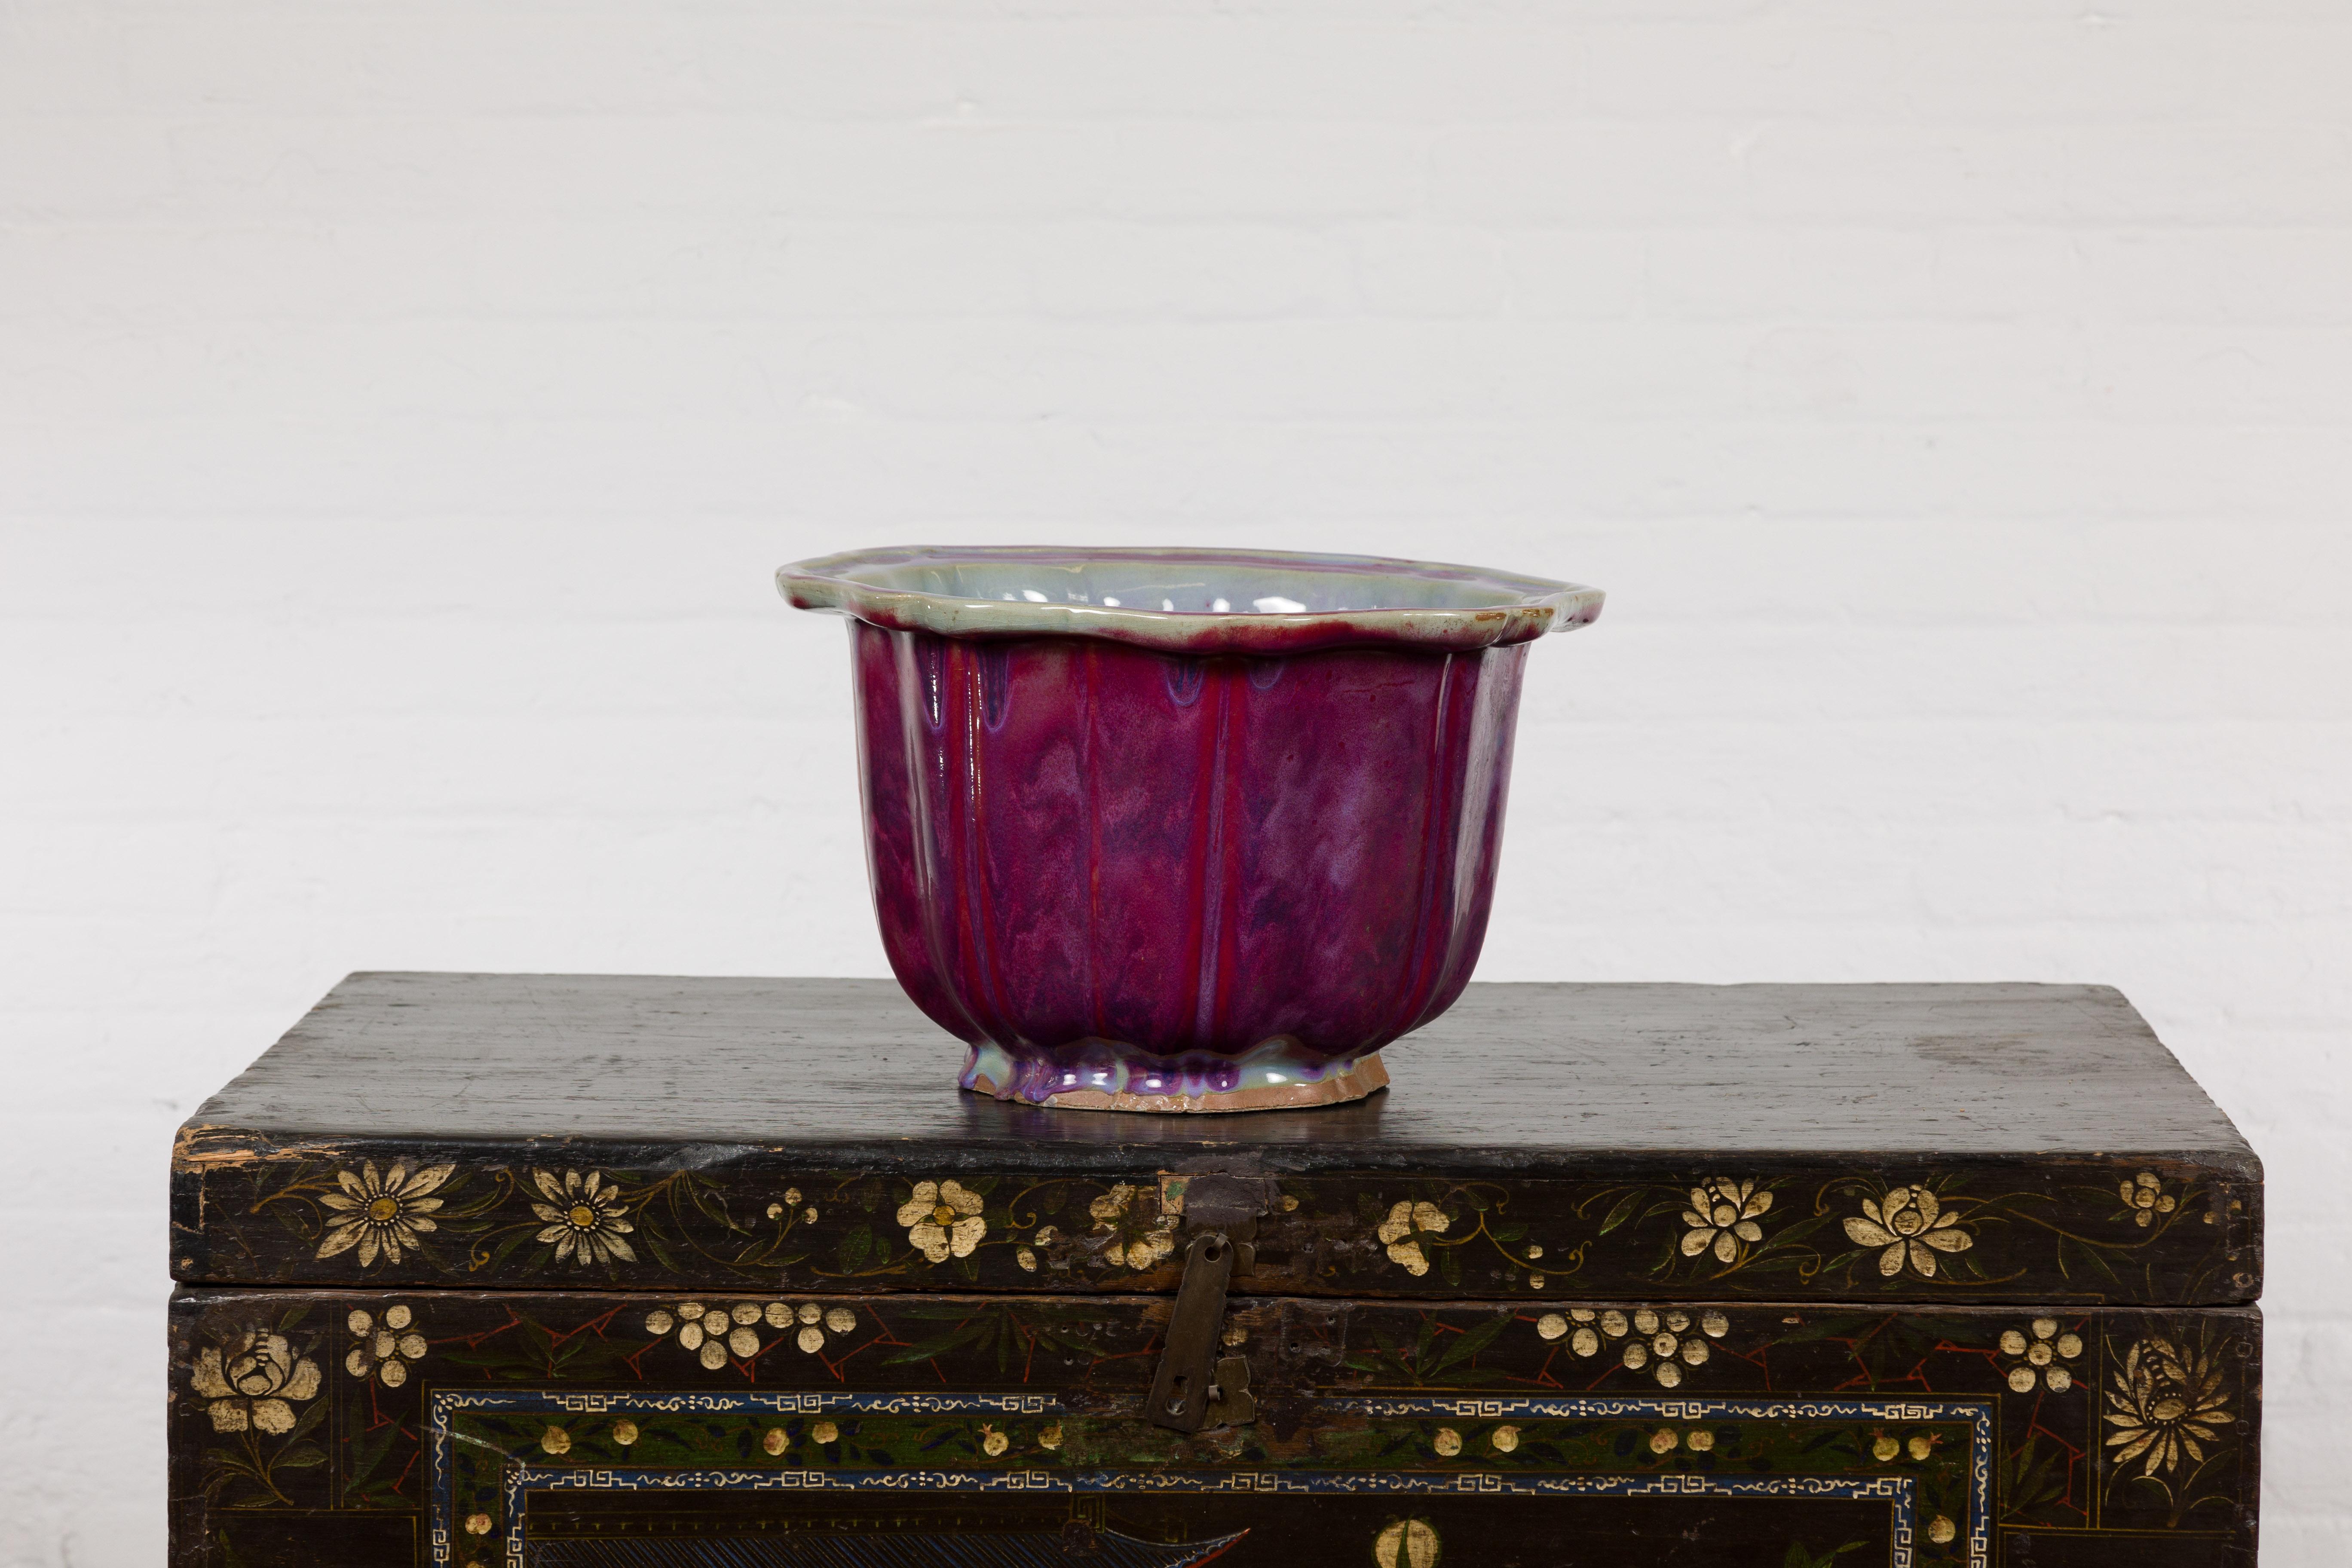 A vintage Chinese purple, blue marbleized red glaze flower pot with light blue inside, scalloped border at the top and calligraphy incised on the underside. Immerse yourself in the beauty of this vintage Chinese flower pot, adorned with a